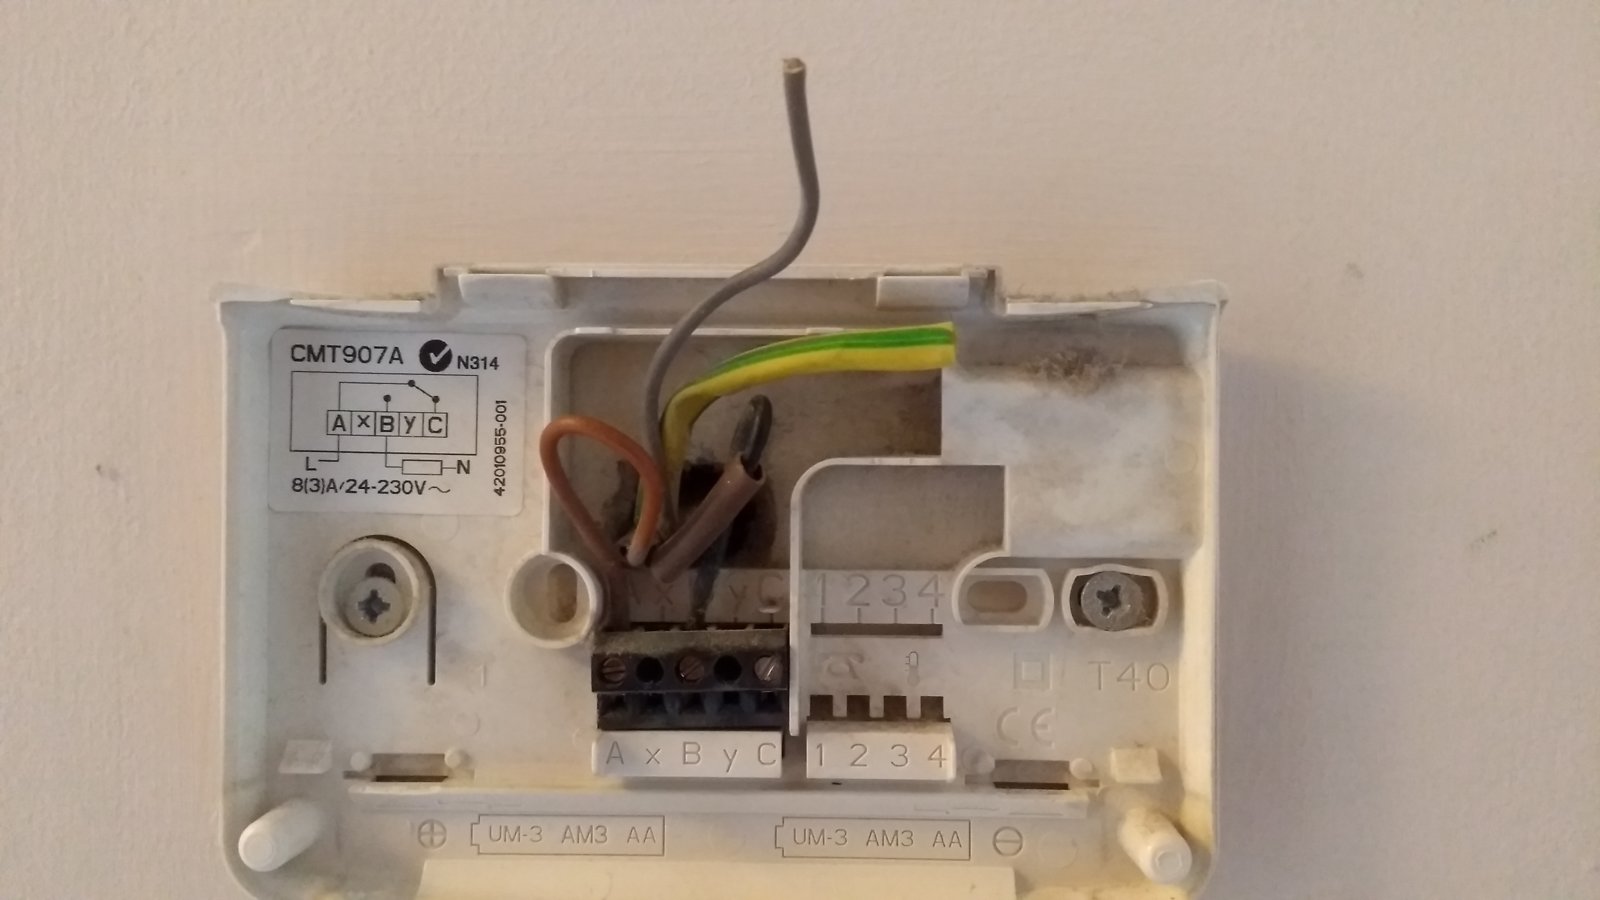 Replace Honeywell CM907 with CM927 | DIYnot Forums